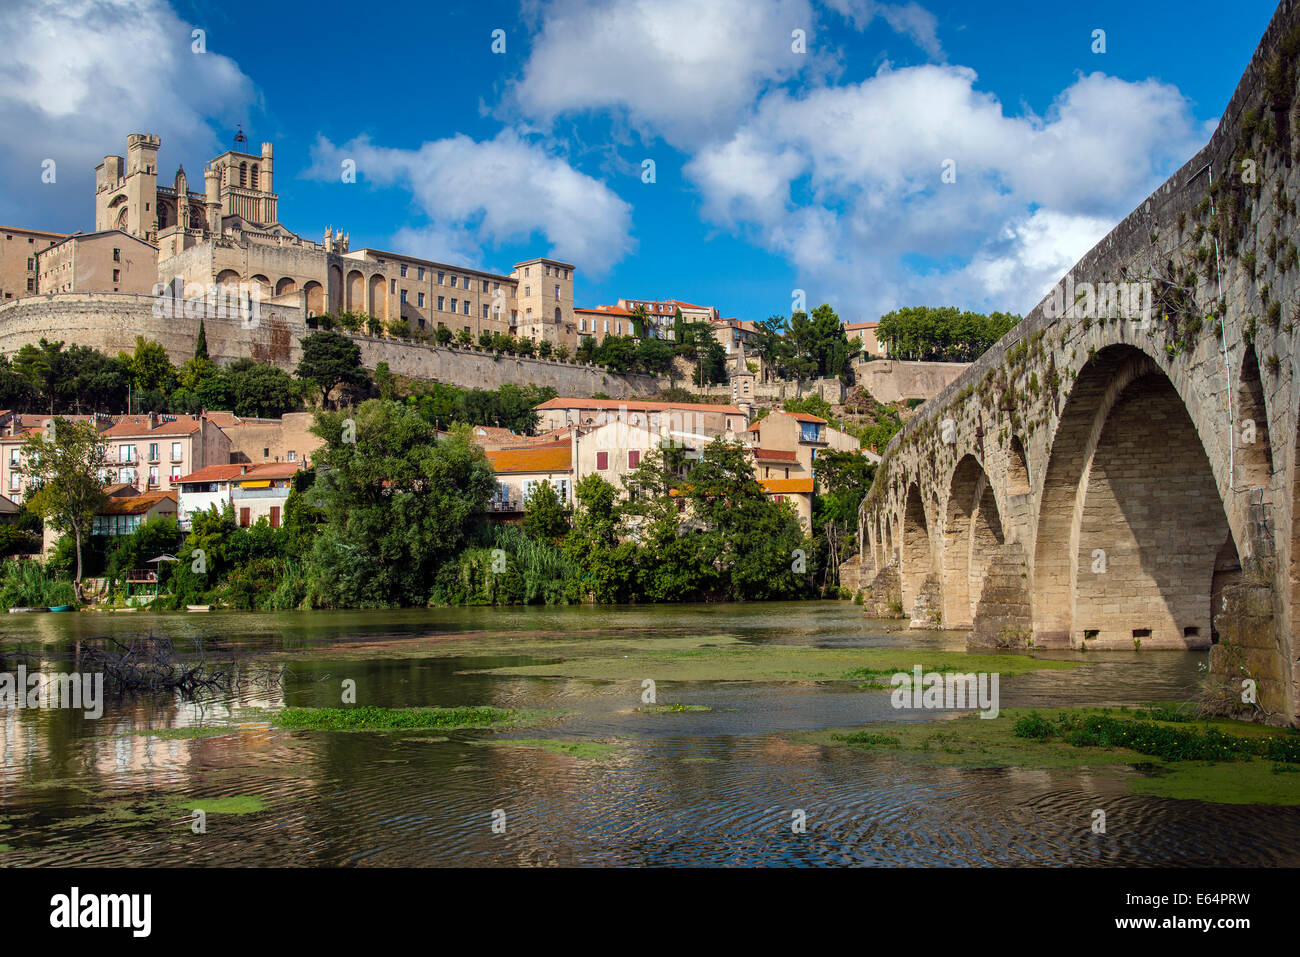 St. Nazaire Cathedral and Pont Vieux or Old Bridge, Beziers, Languedoc-Roussillon, France Stock Photo